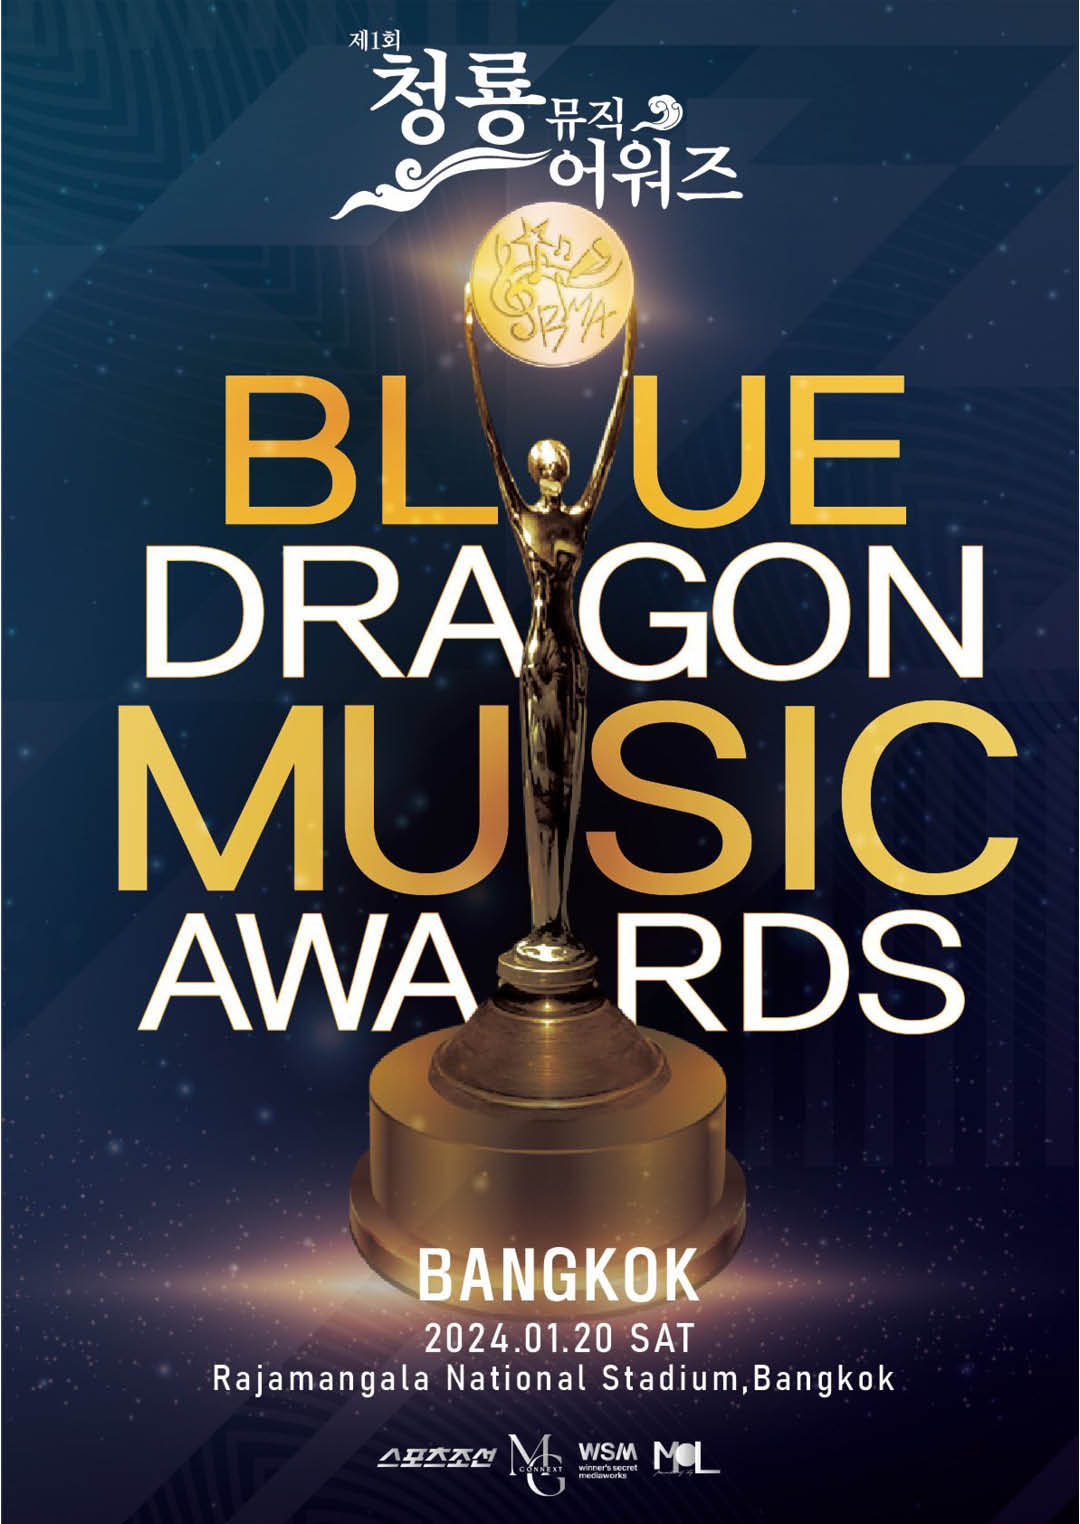 The 1st Blue Dragon Music Awards